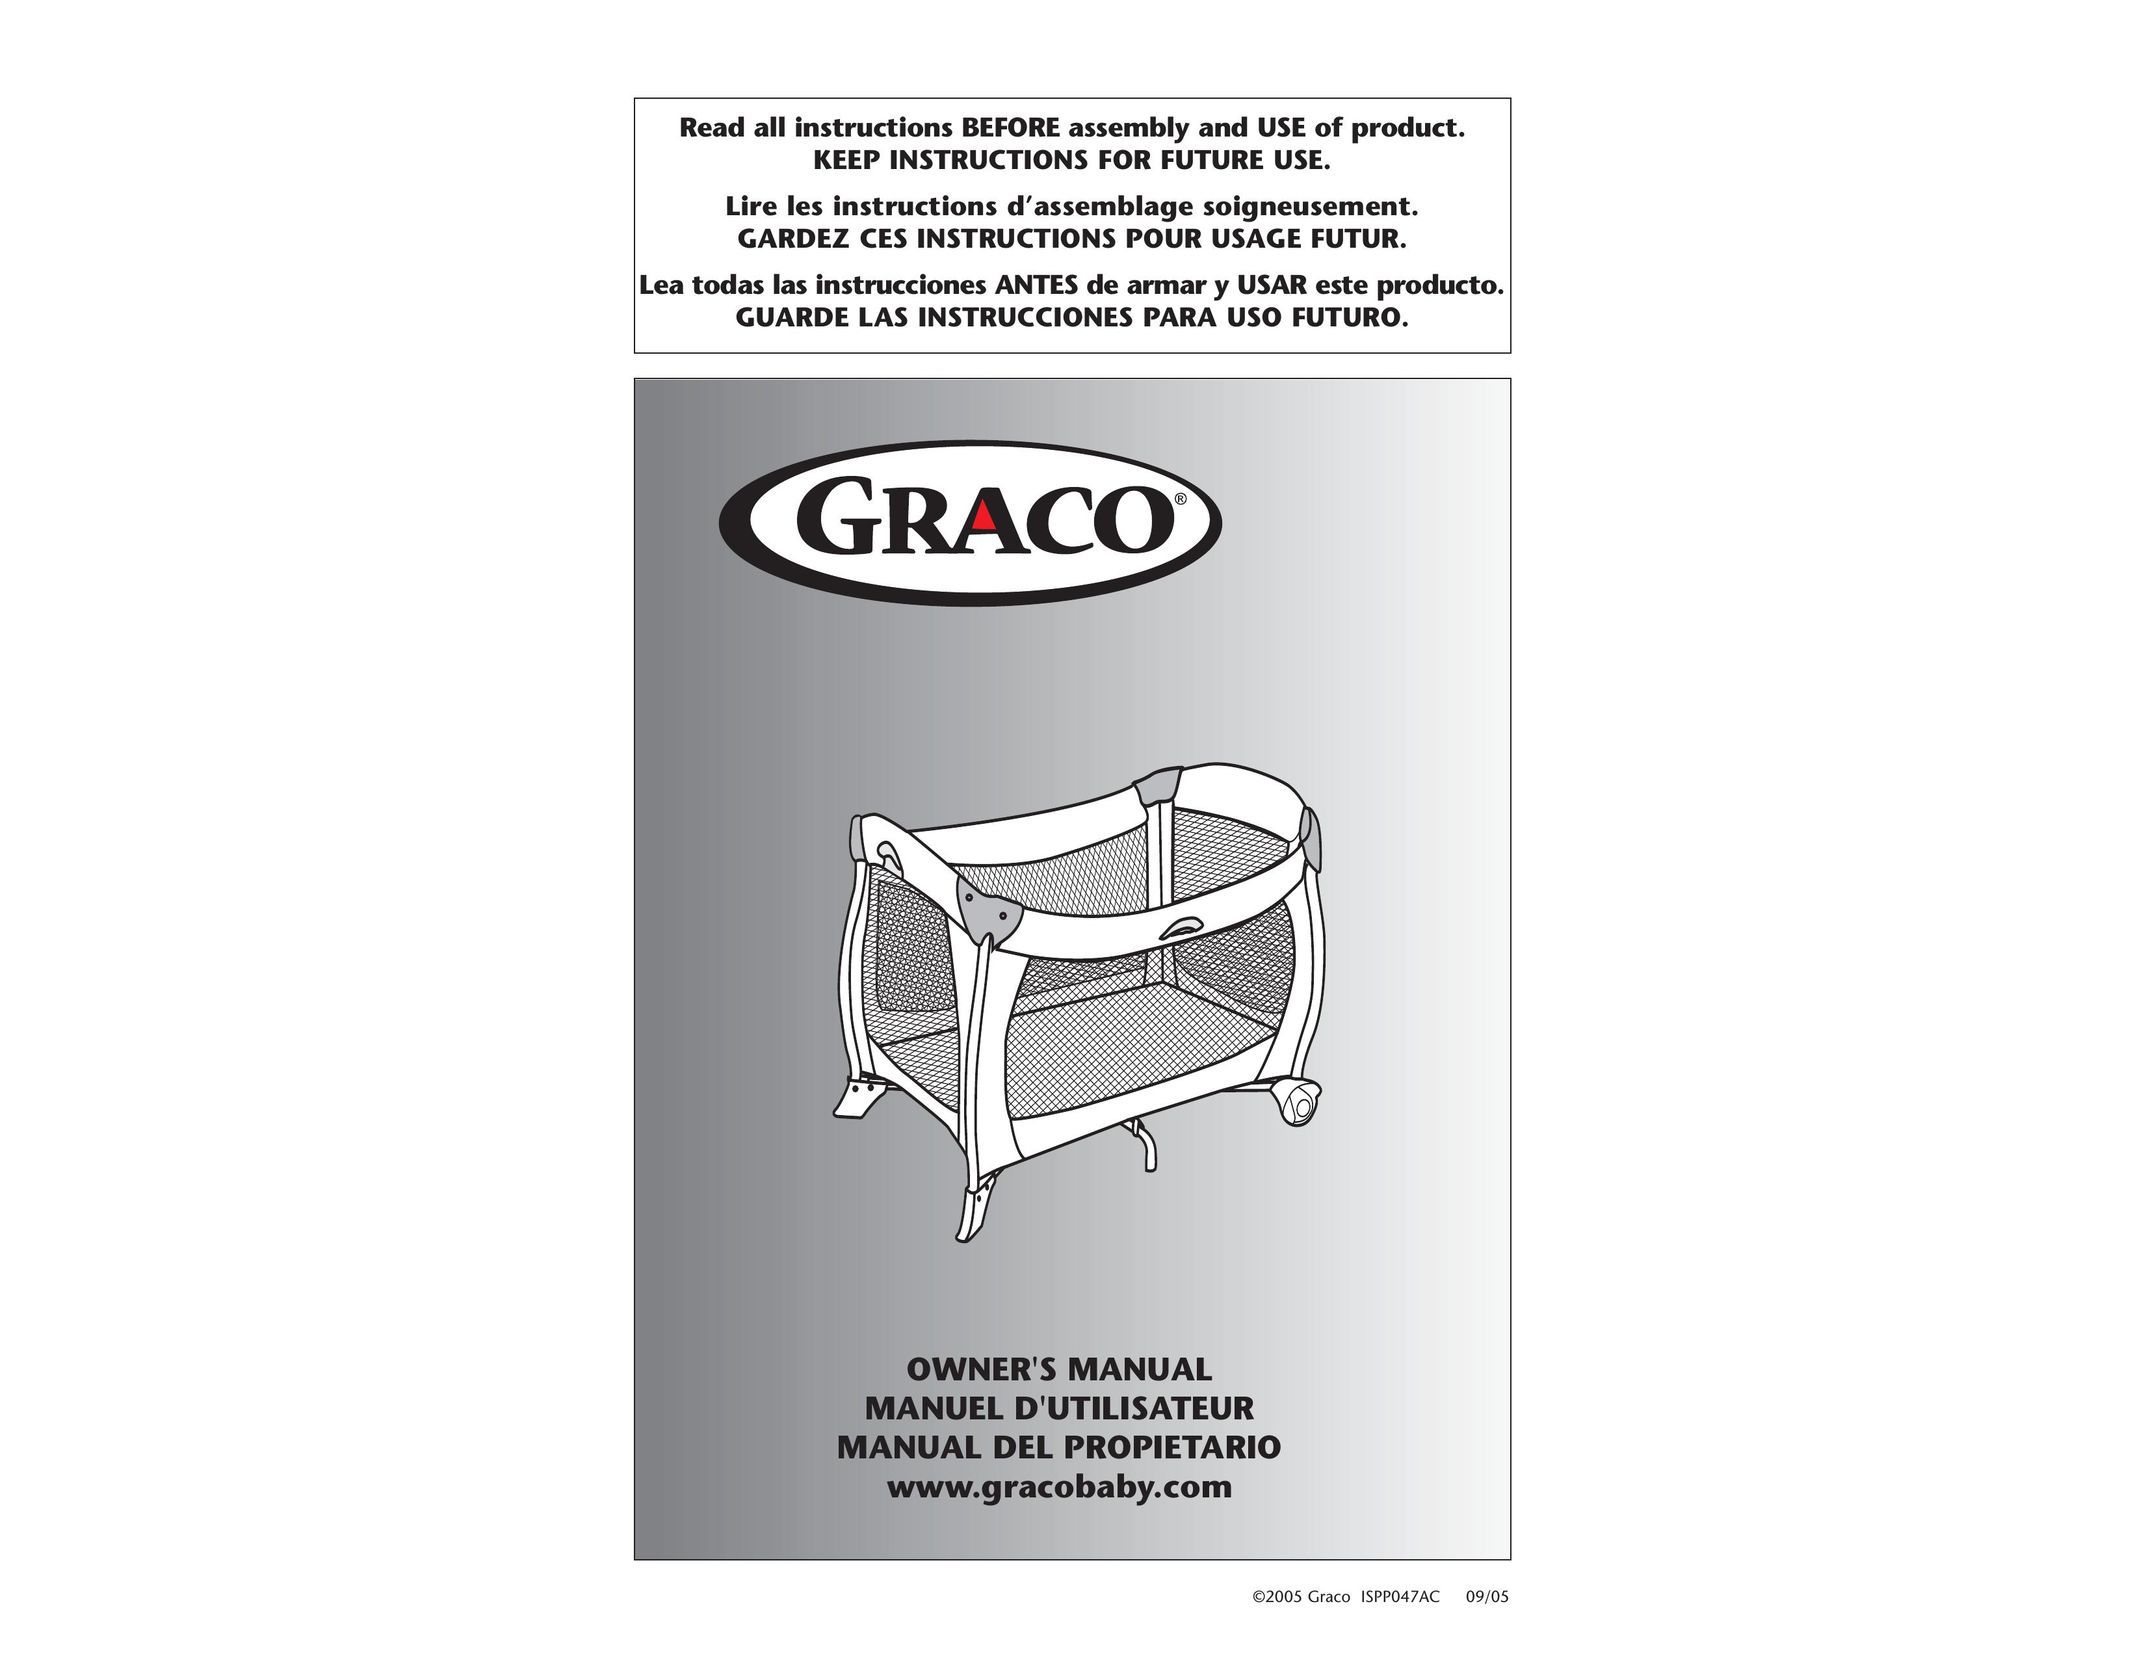 Graco ISPP047AC Fitness Equipment User Manual (Page 1)